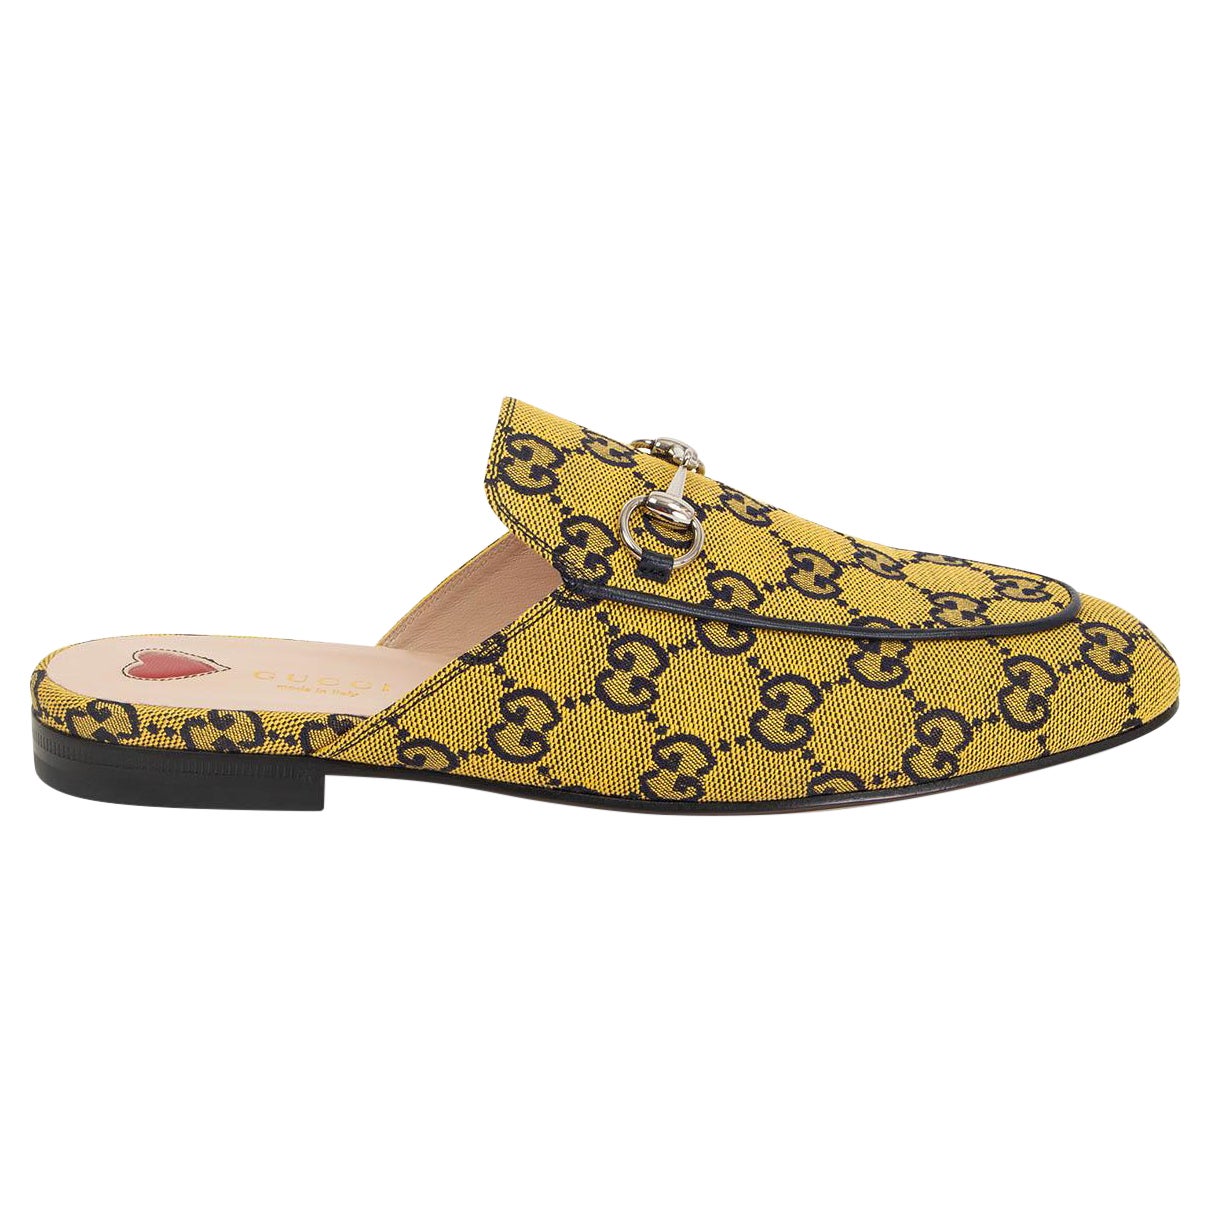 GUCCI yellow GG CANVAS PRINCETOWN Slippers Flats Shoes 38